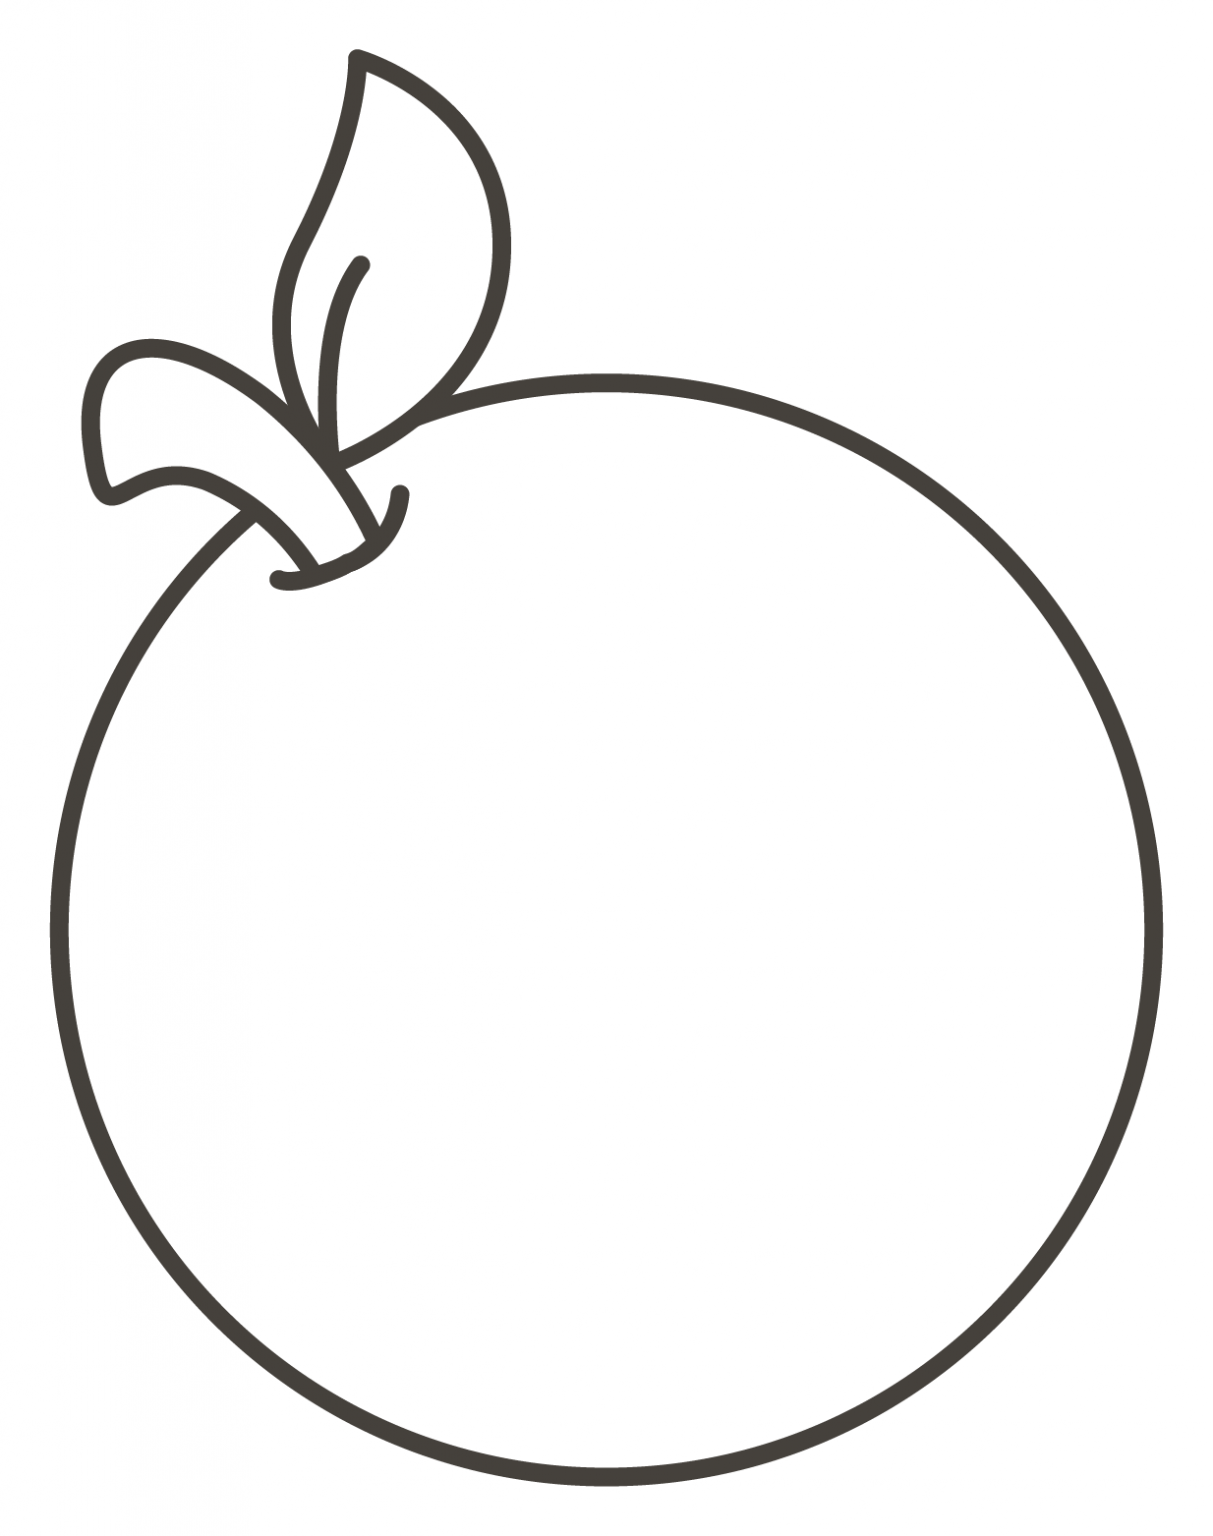 Tangerine coloring page - ColouringPages